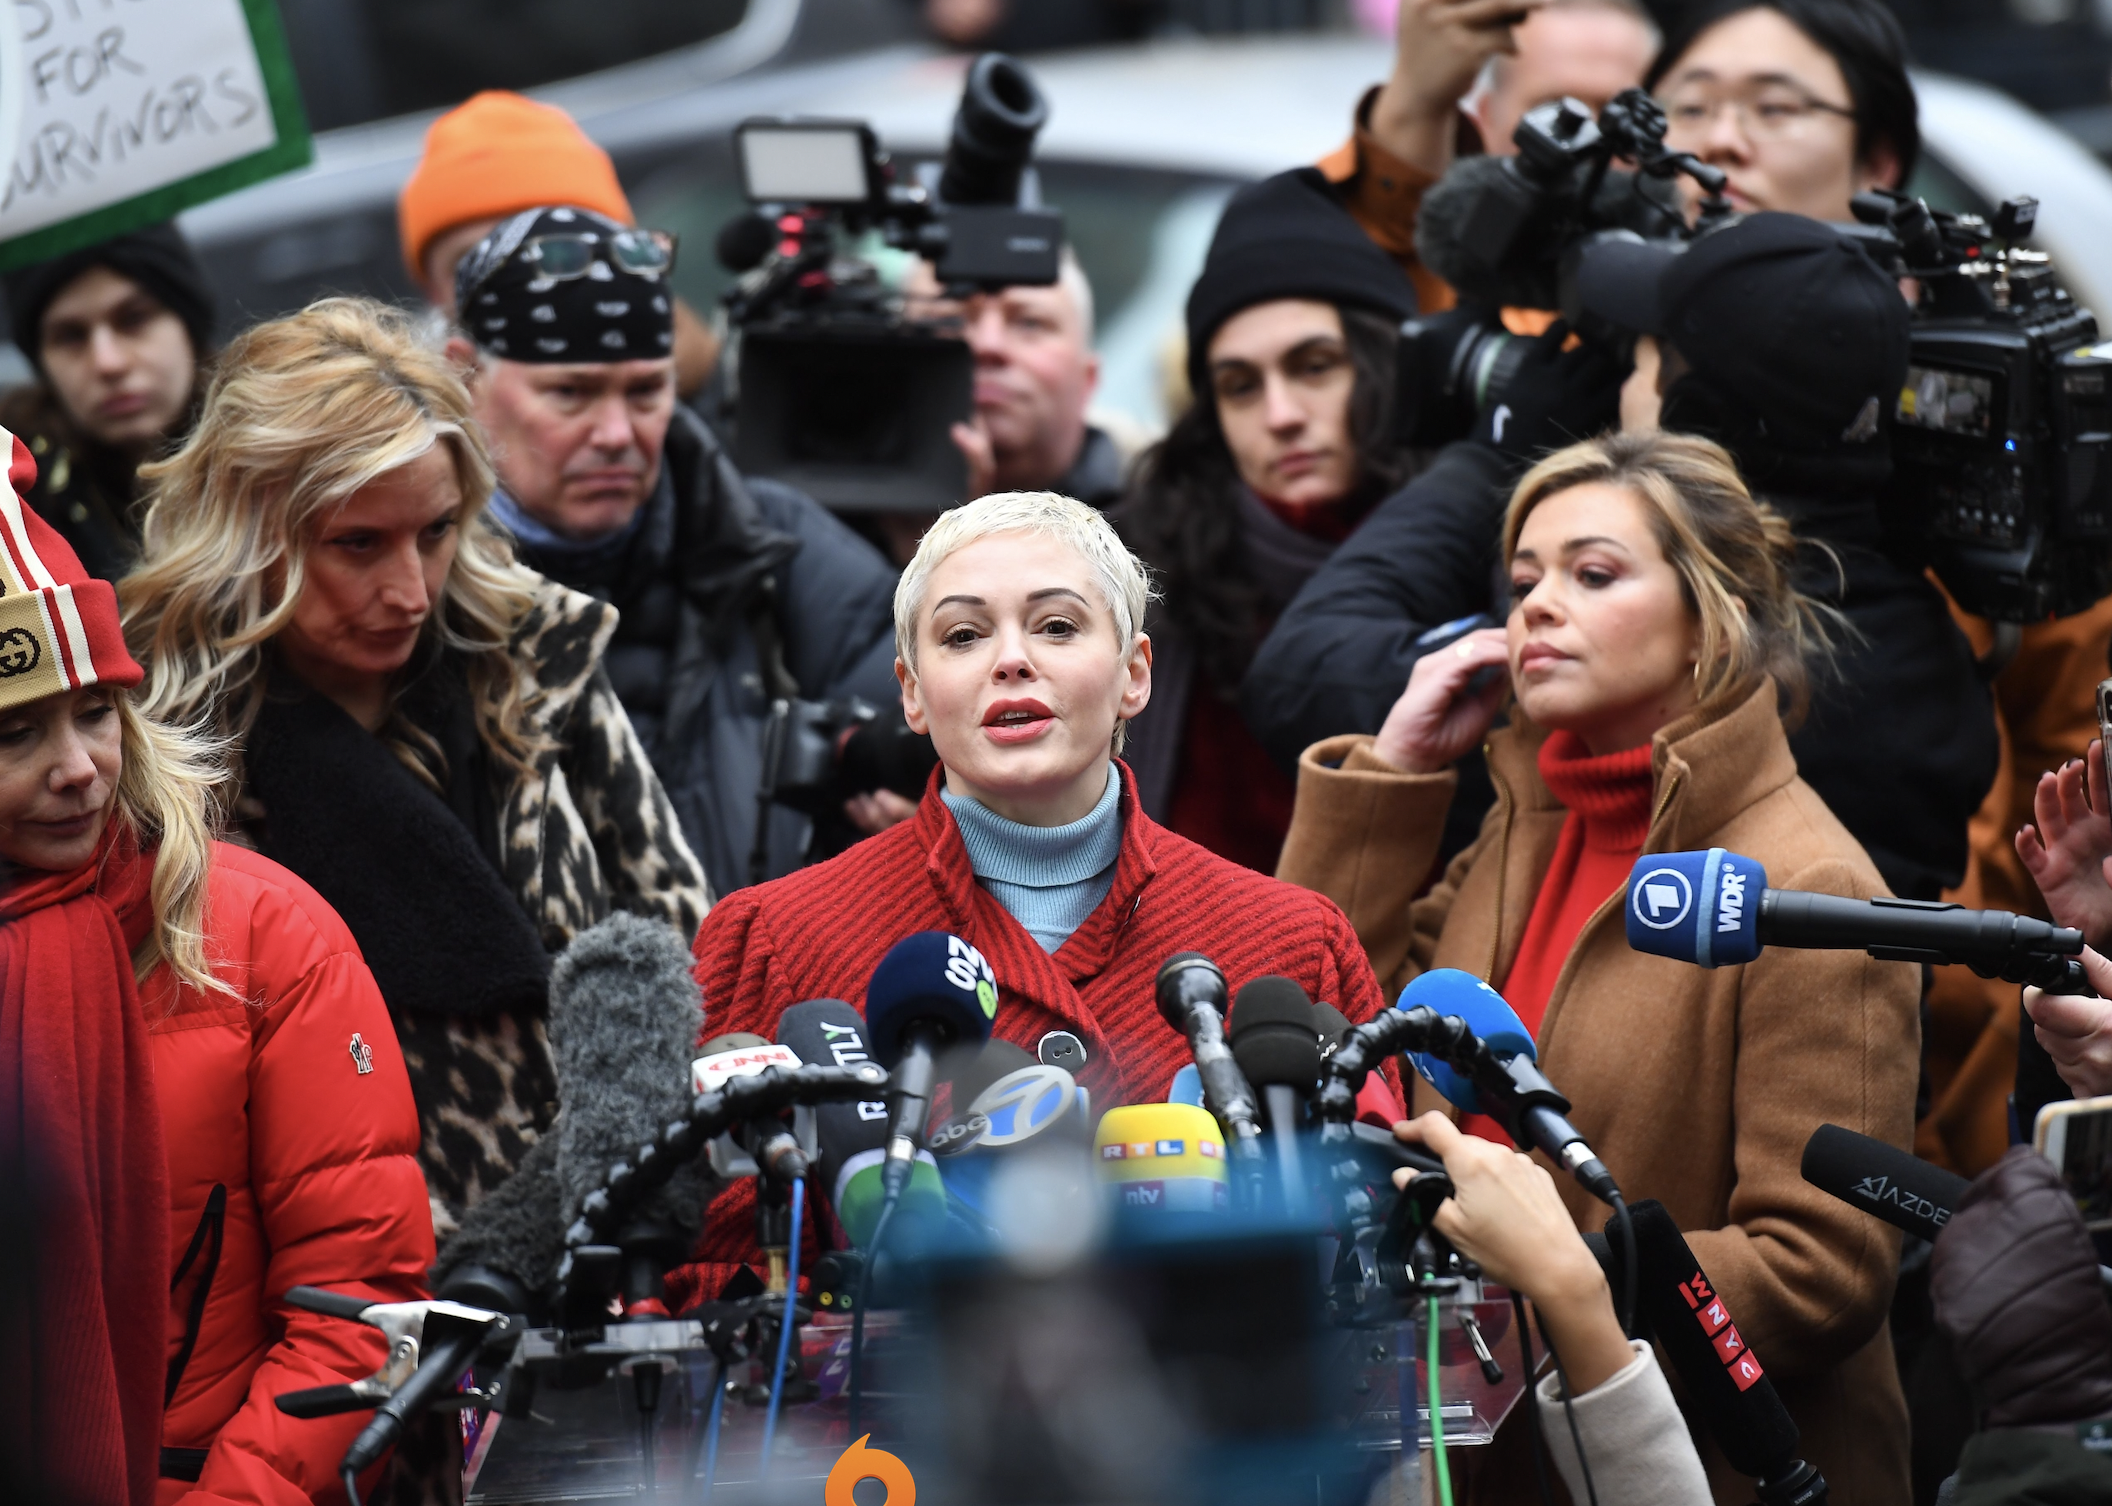 Actress Rose McGowan speaks during a press conference.